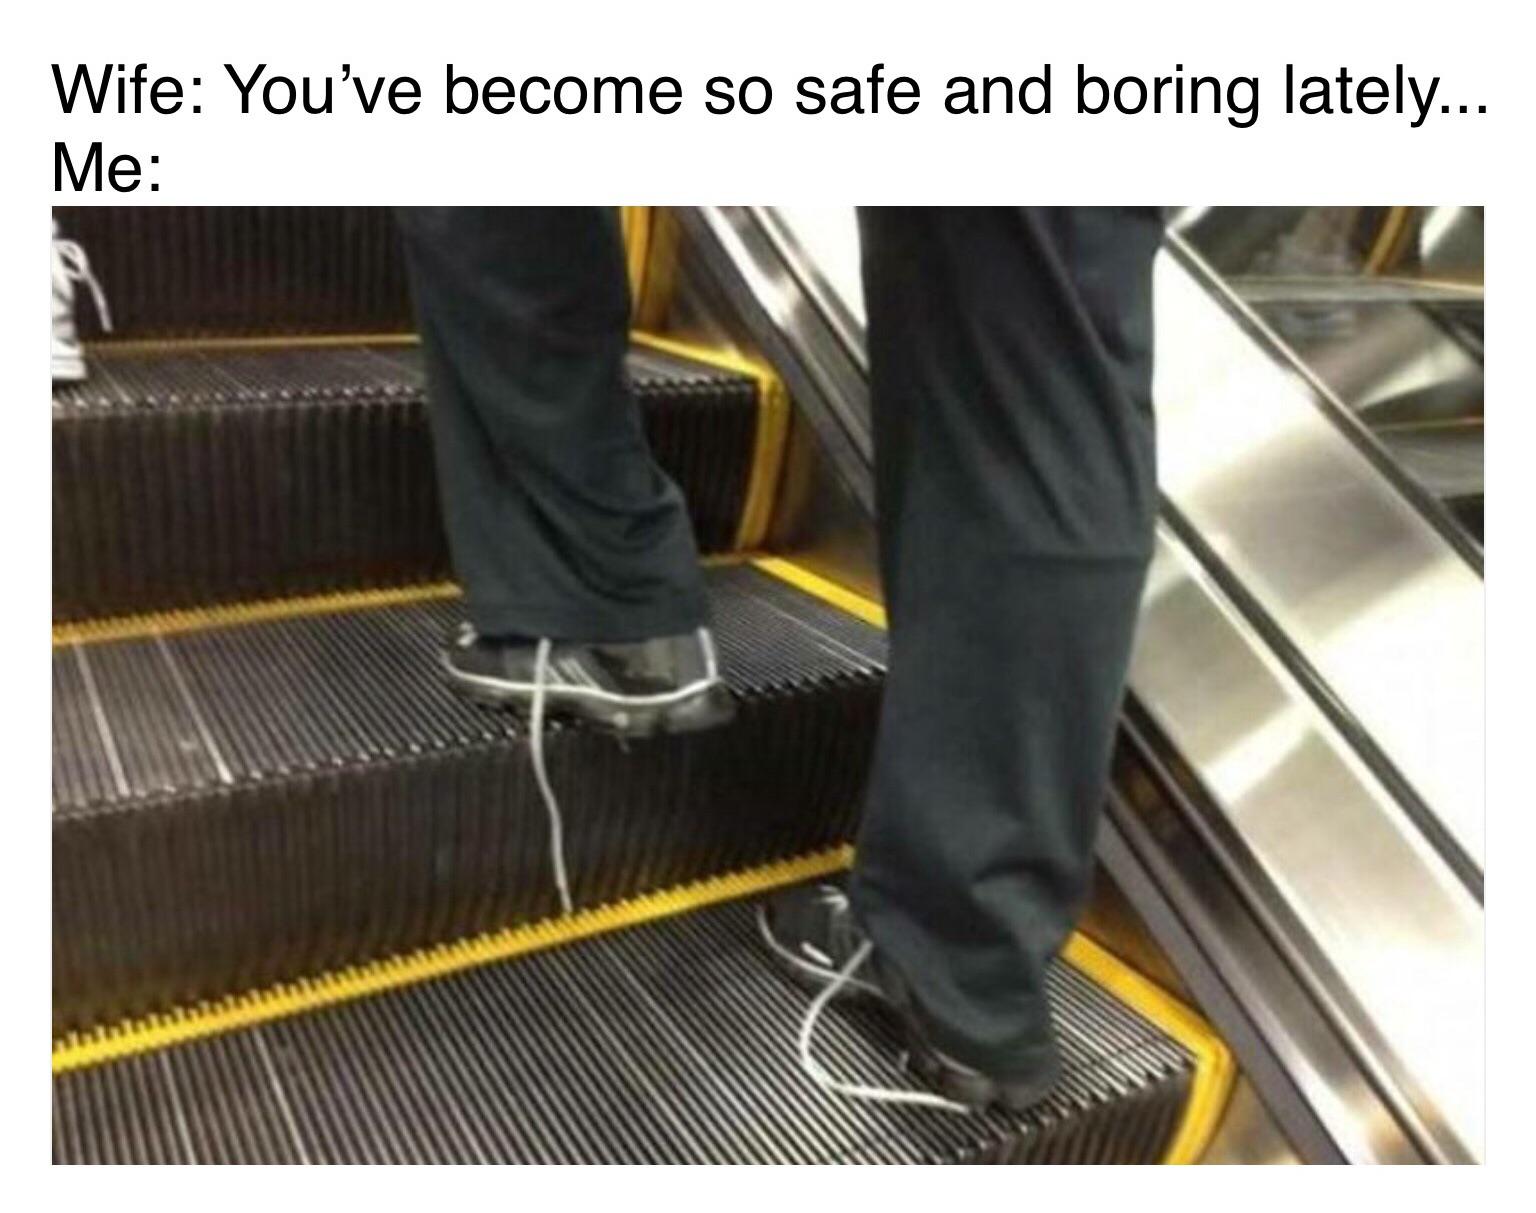 shoelace caught in escalator - Wife You've become so safe and boring lately... Me